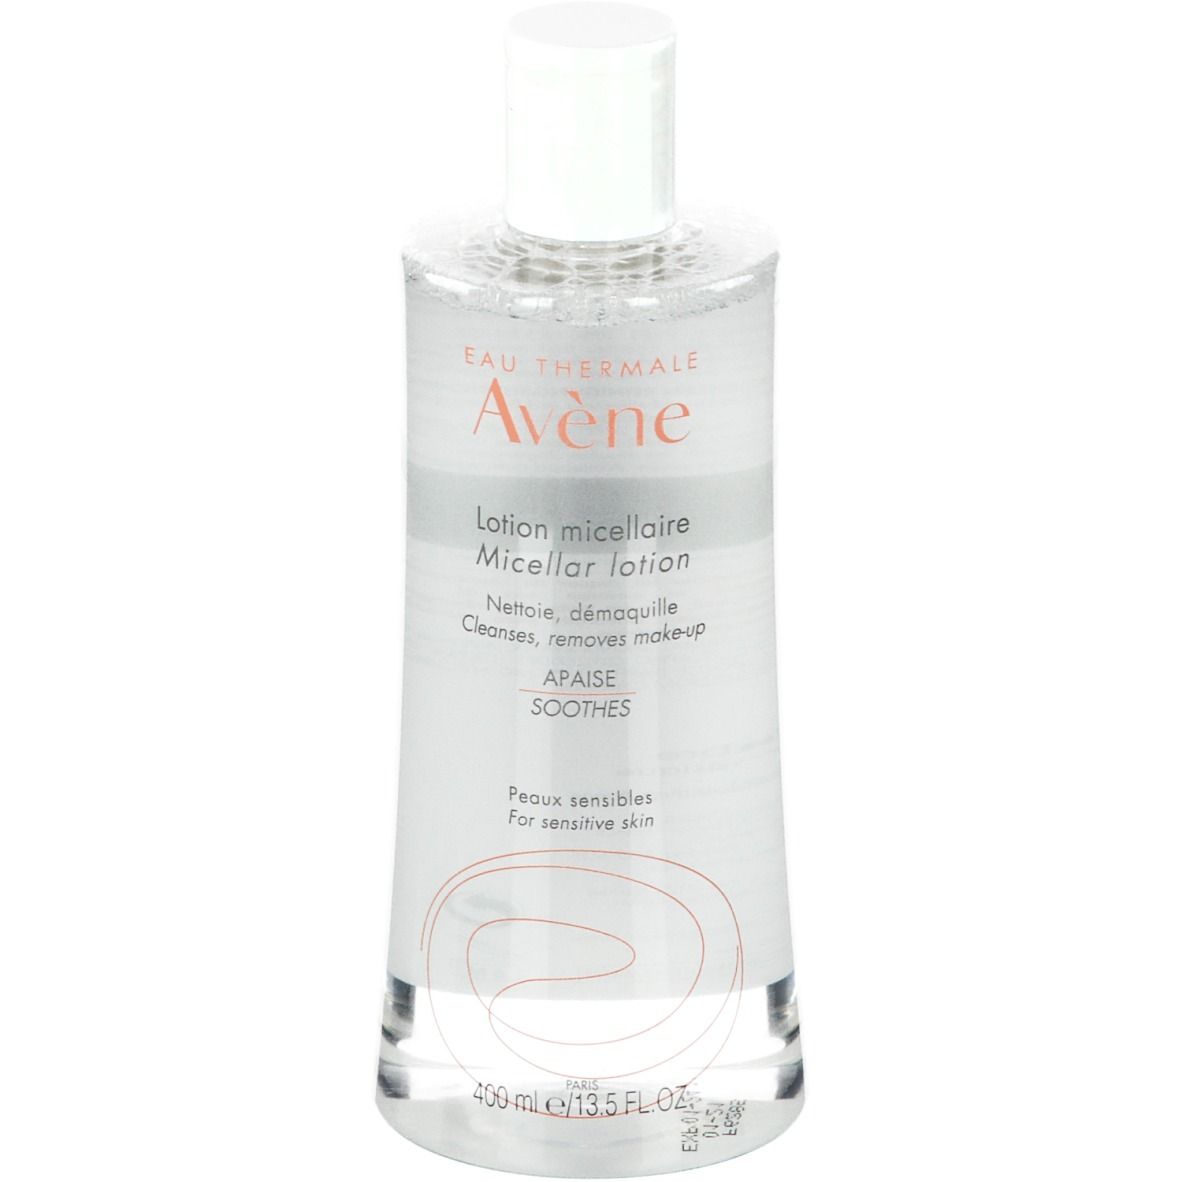 Avène Lotion Micellaire